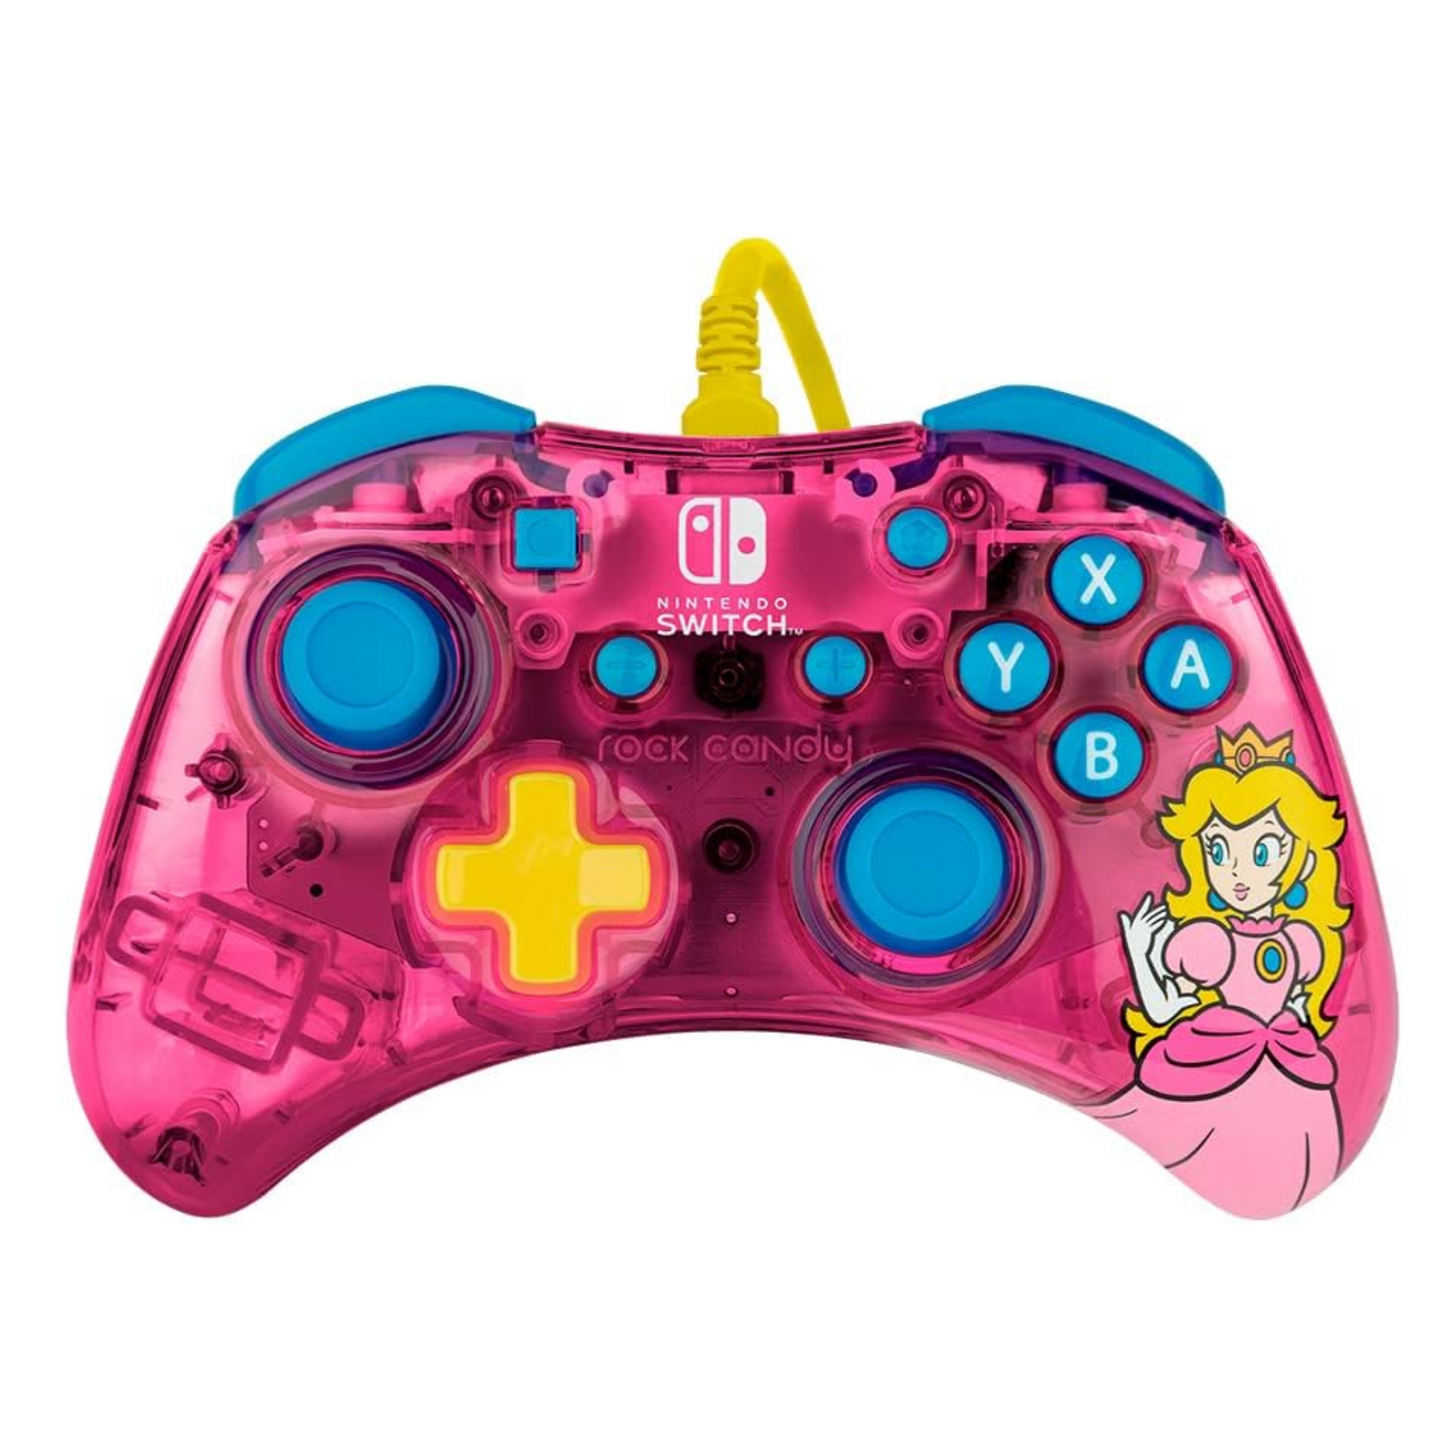 PDP Rock Candy wired Controller for Nintendo Switch - Princess peach